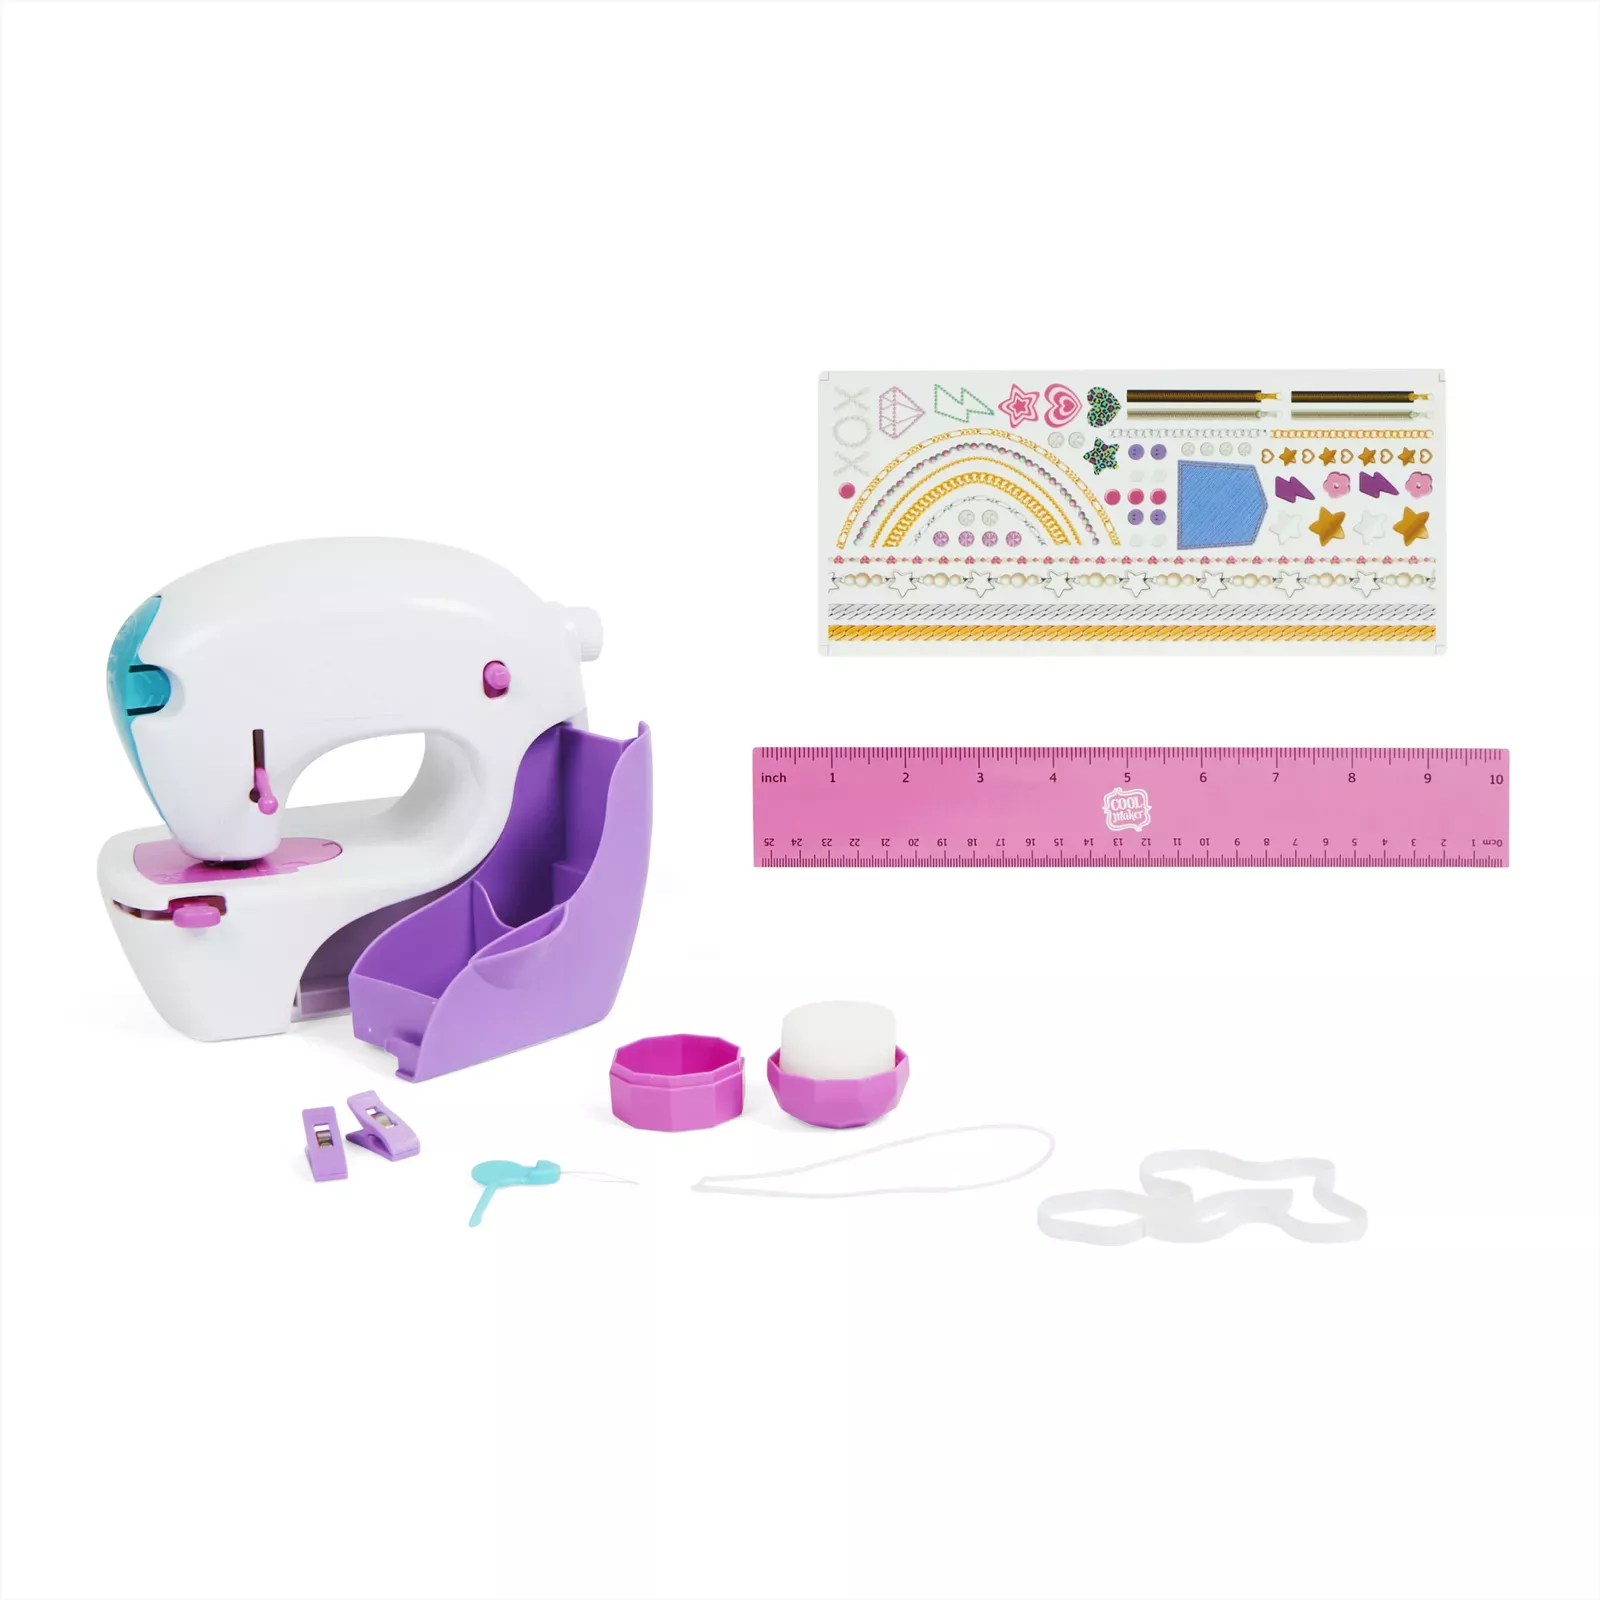 Cool Maker, Stitch 'N Style Fashion Studio, Pre-Threaded Sewing Machine Toy  with Fabric and Water Transfer Prints, Arts & Crafts Kids Toys for Girls